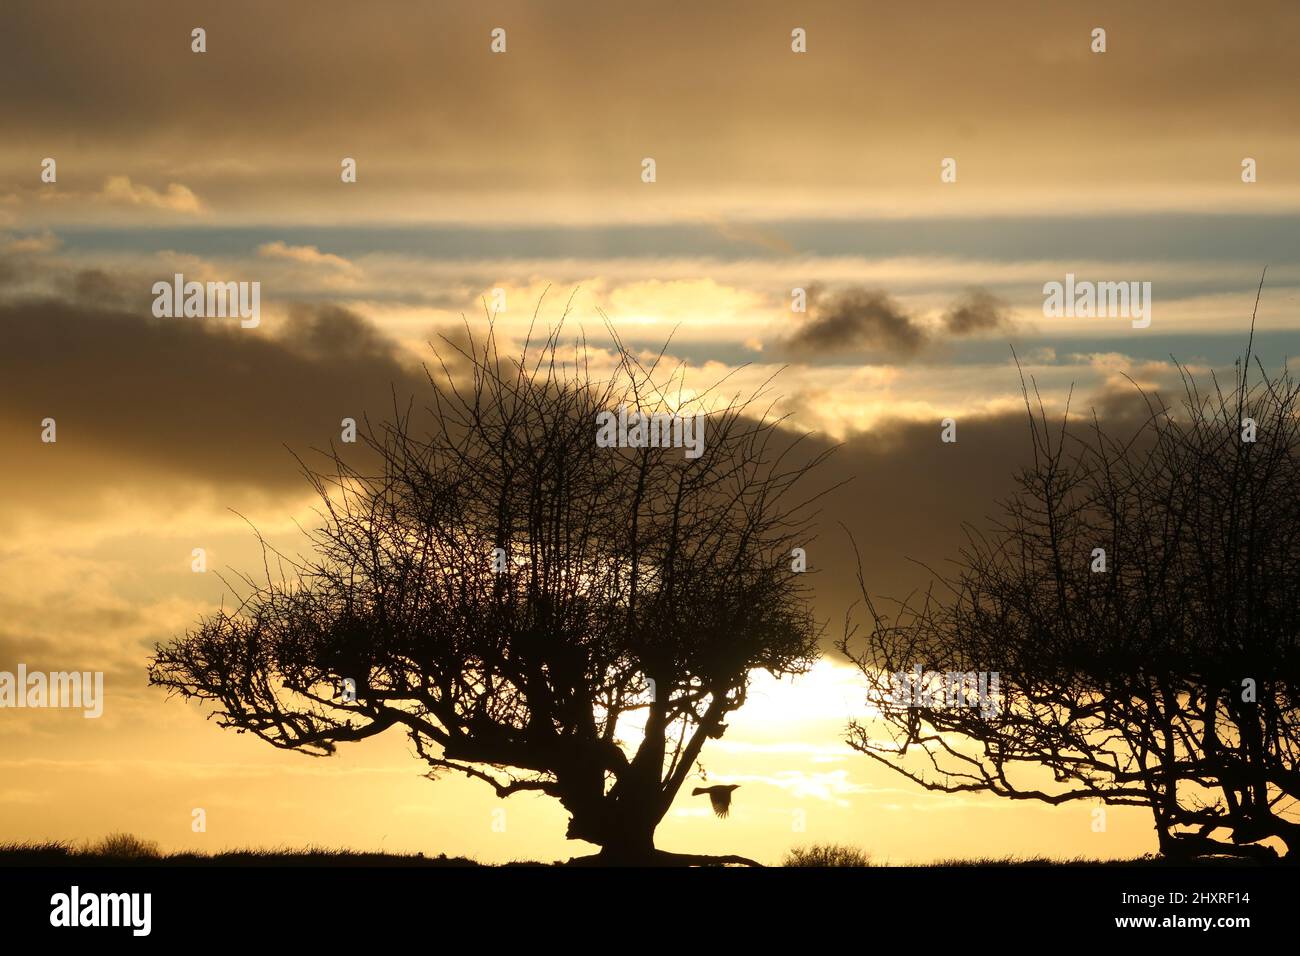 Silhouettes of bird in flight and hawthorn trees at sundown with golden sunset coloured clouds in an evening sky. Stock Photo